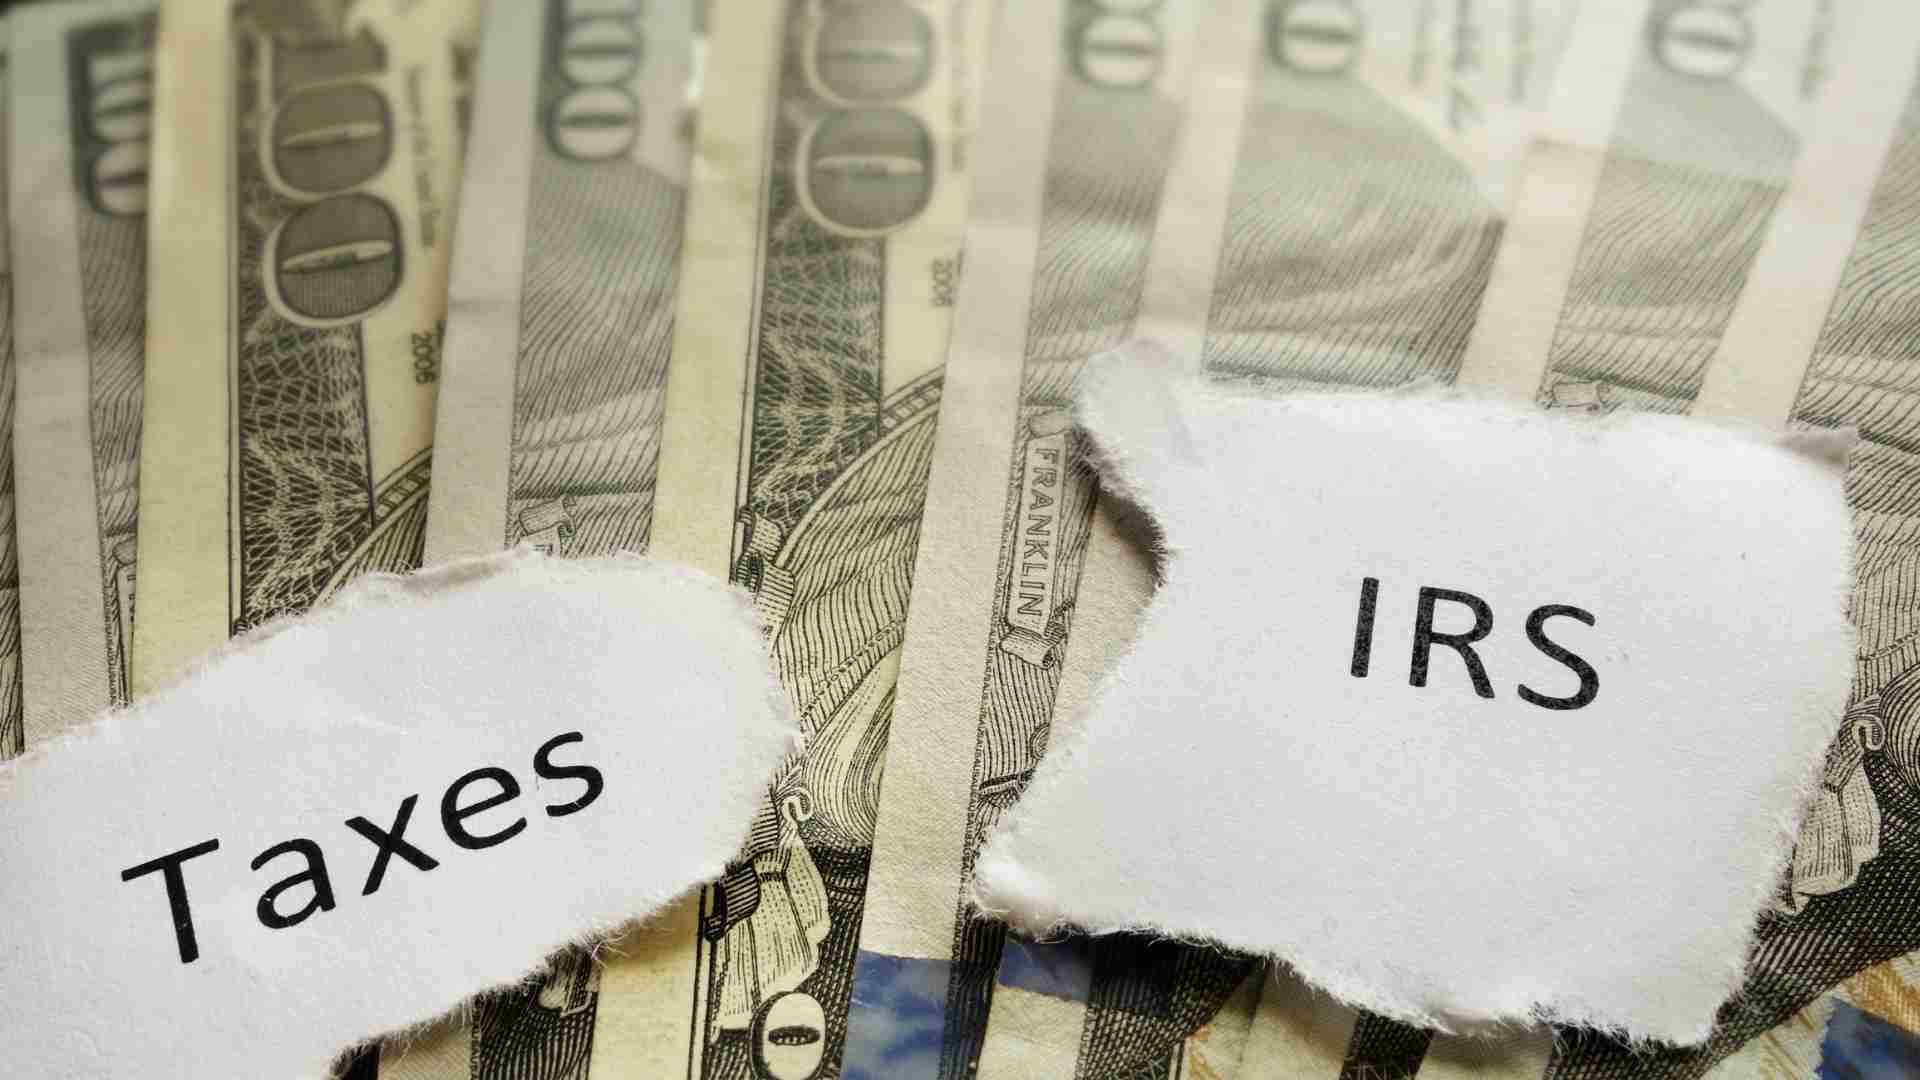 January 22 is the first important date you need to save if you want to get your tax refund as soon as possible claims the IRS